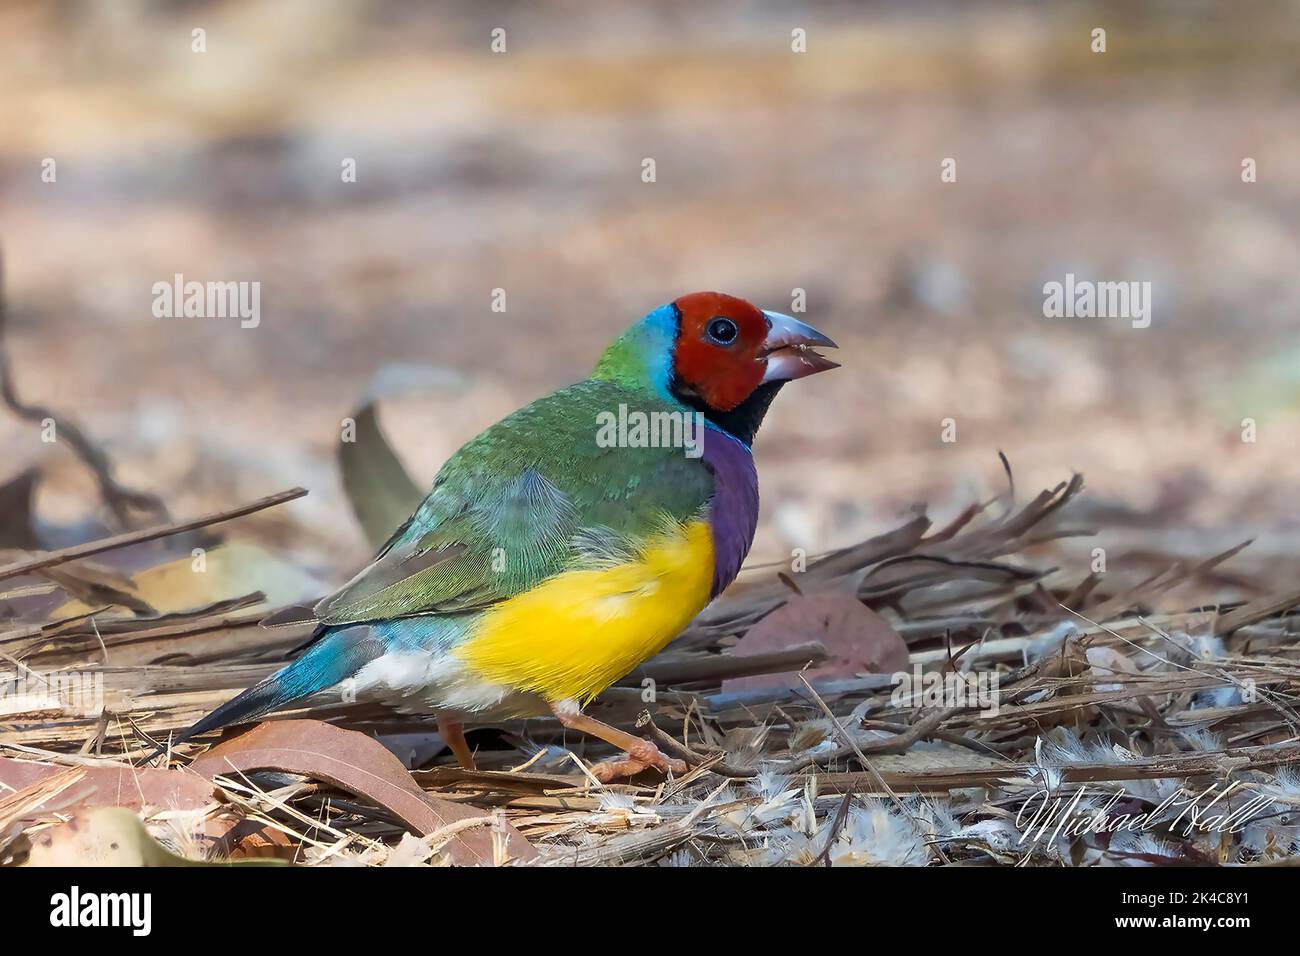 A closeup of adorable Gouldian finch standing on dry leaves and twigs on the ground Stock Photo